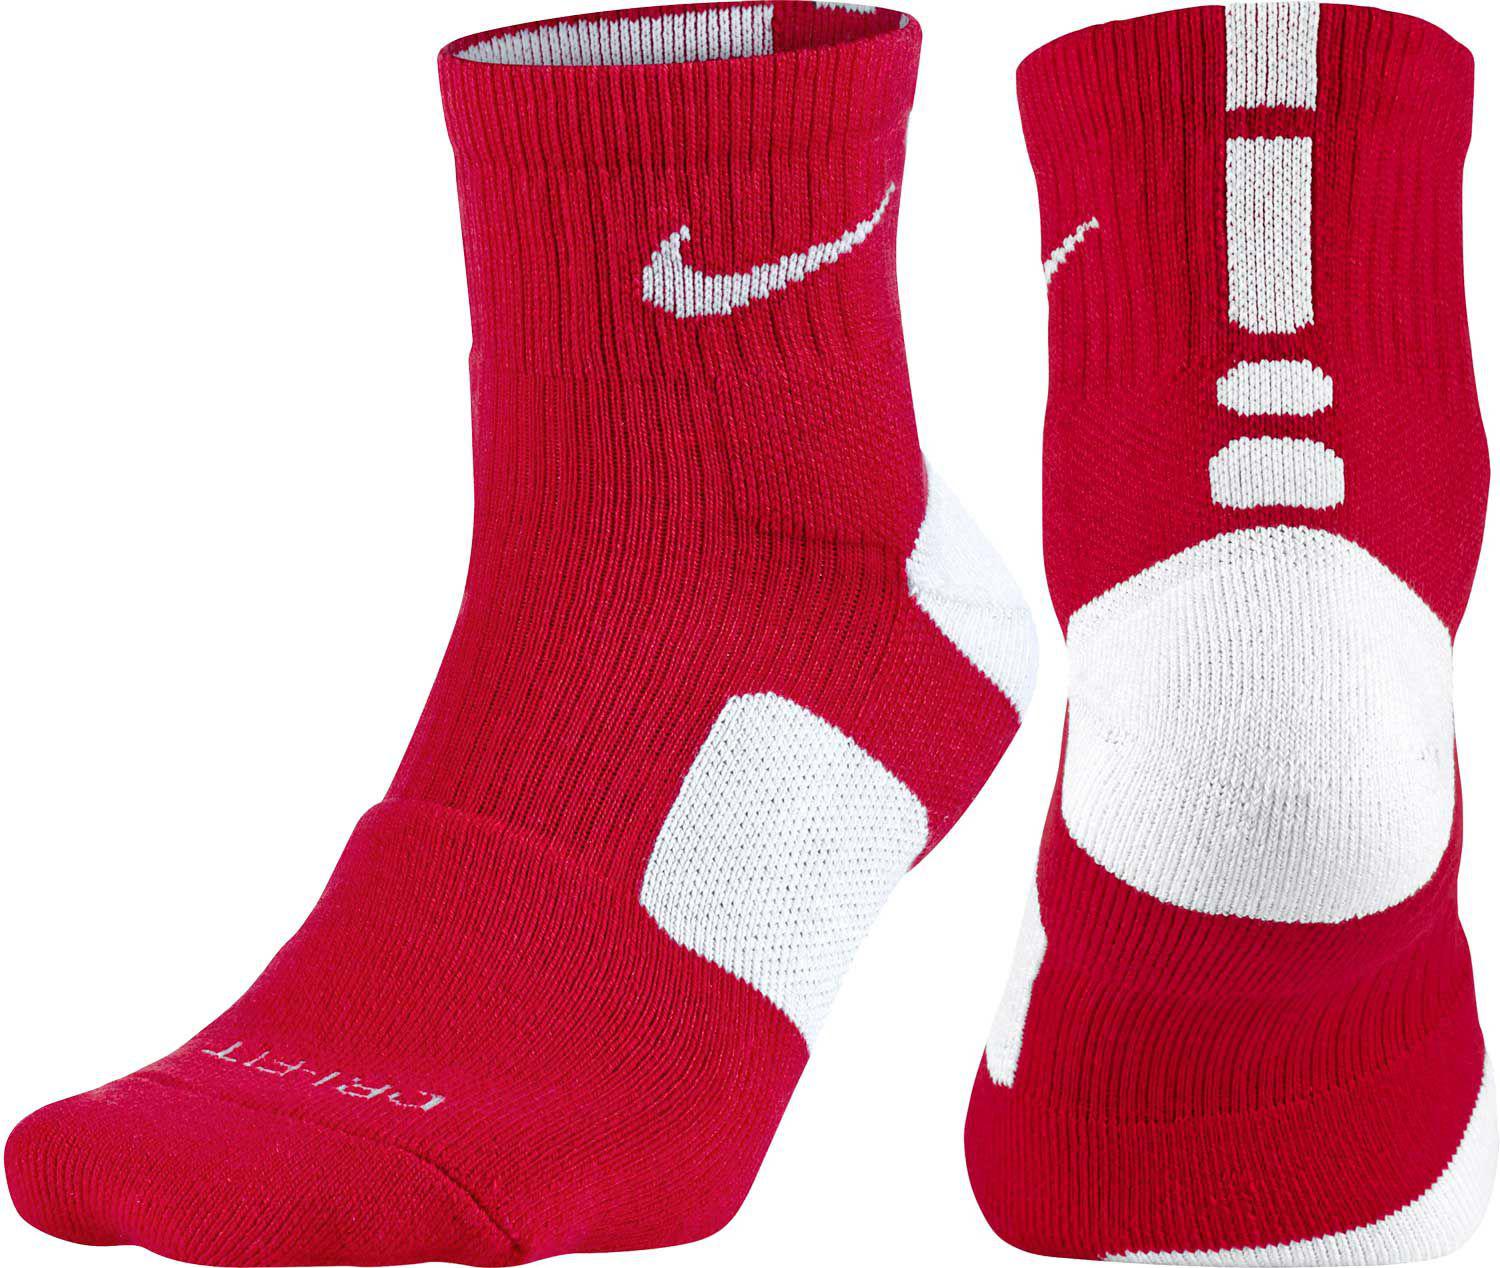 red and white basketball socks